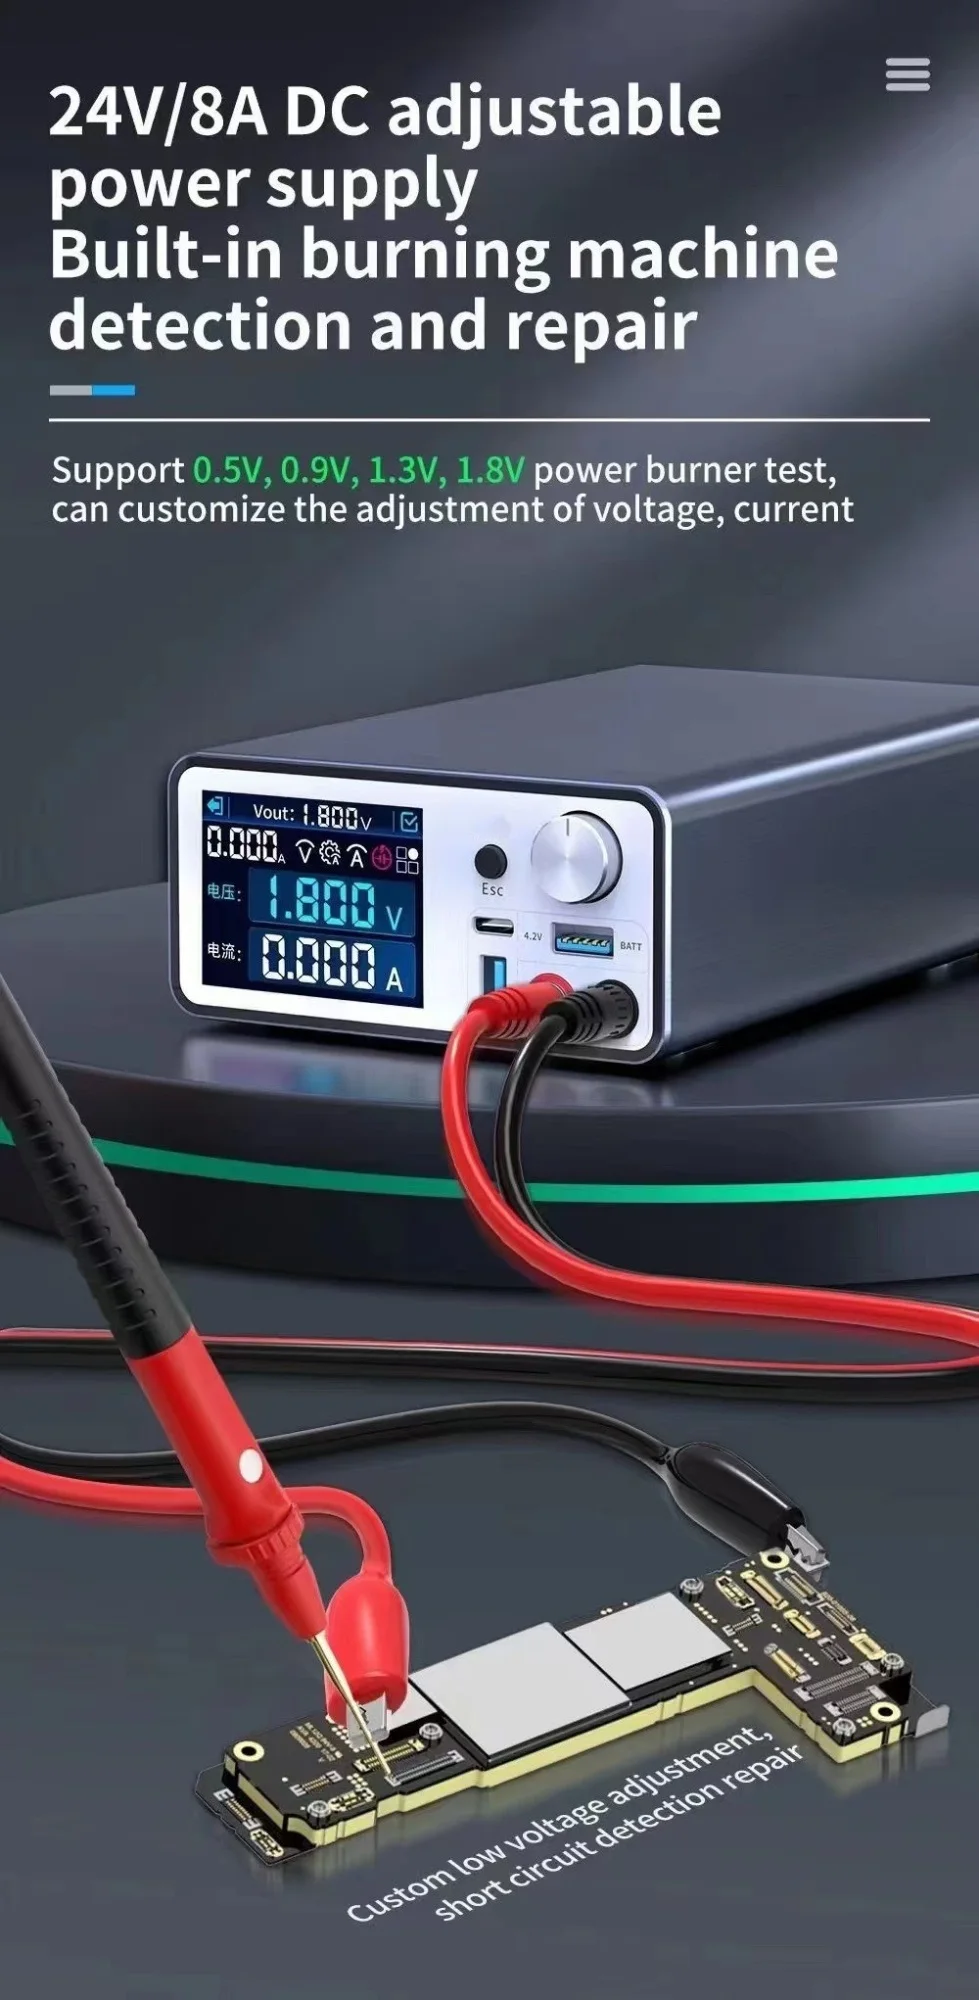 P2408 Intelligent Stabilized Power Supply With Adjustable Voltage And Current/Powerful New Updating Version enlarge